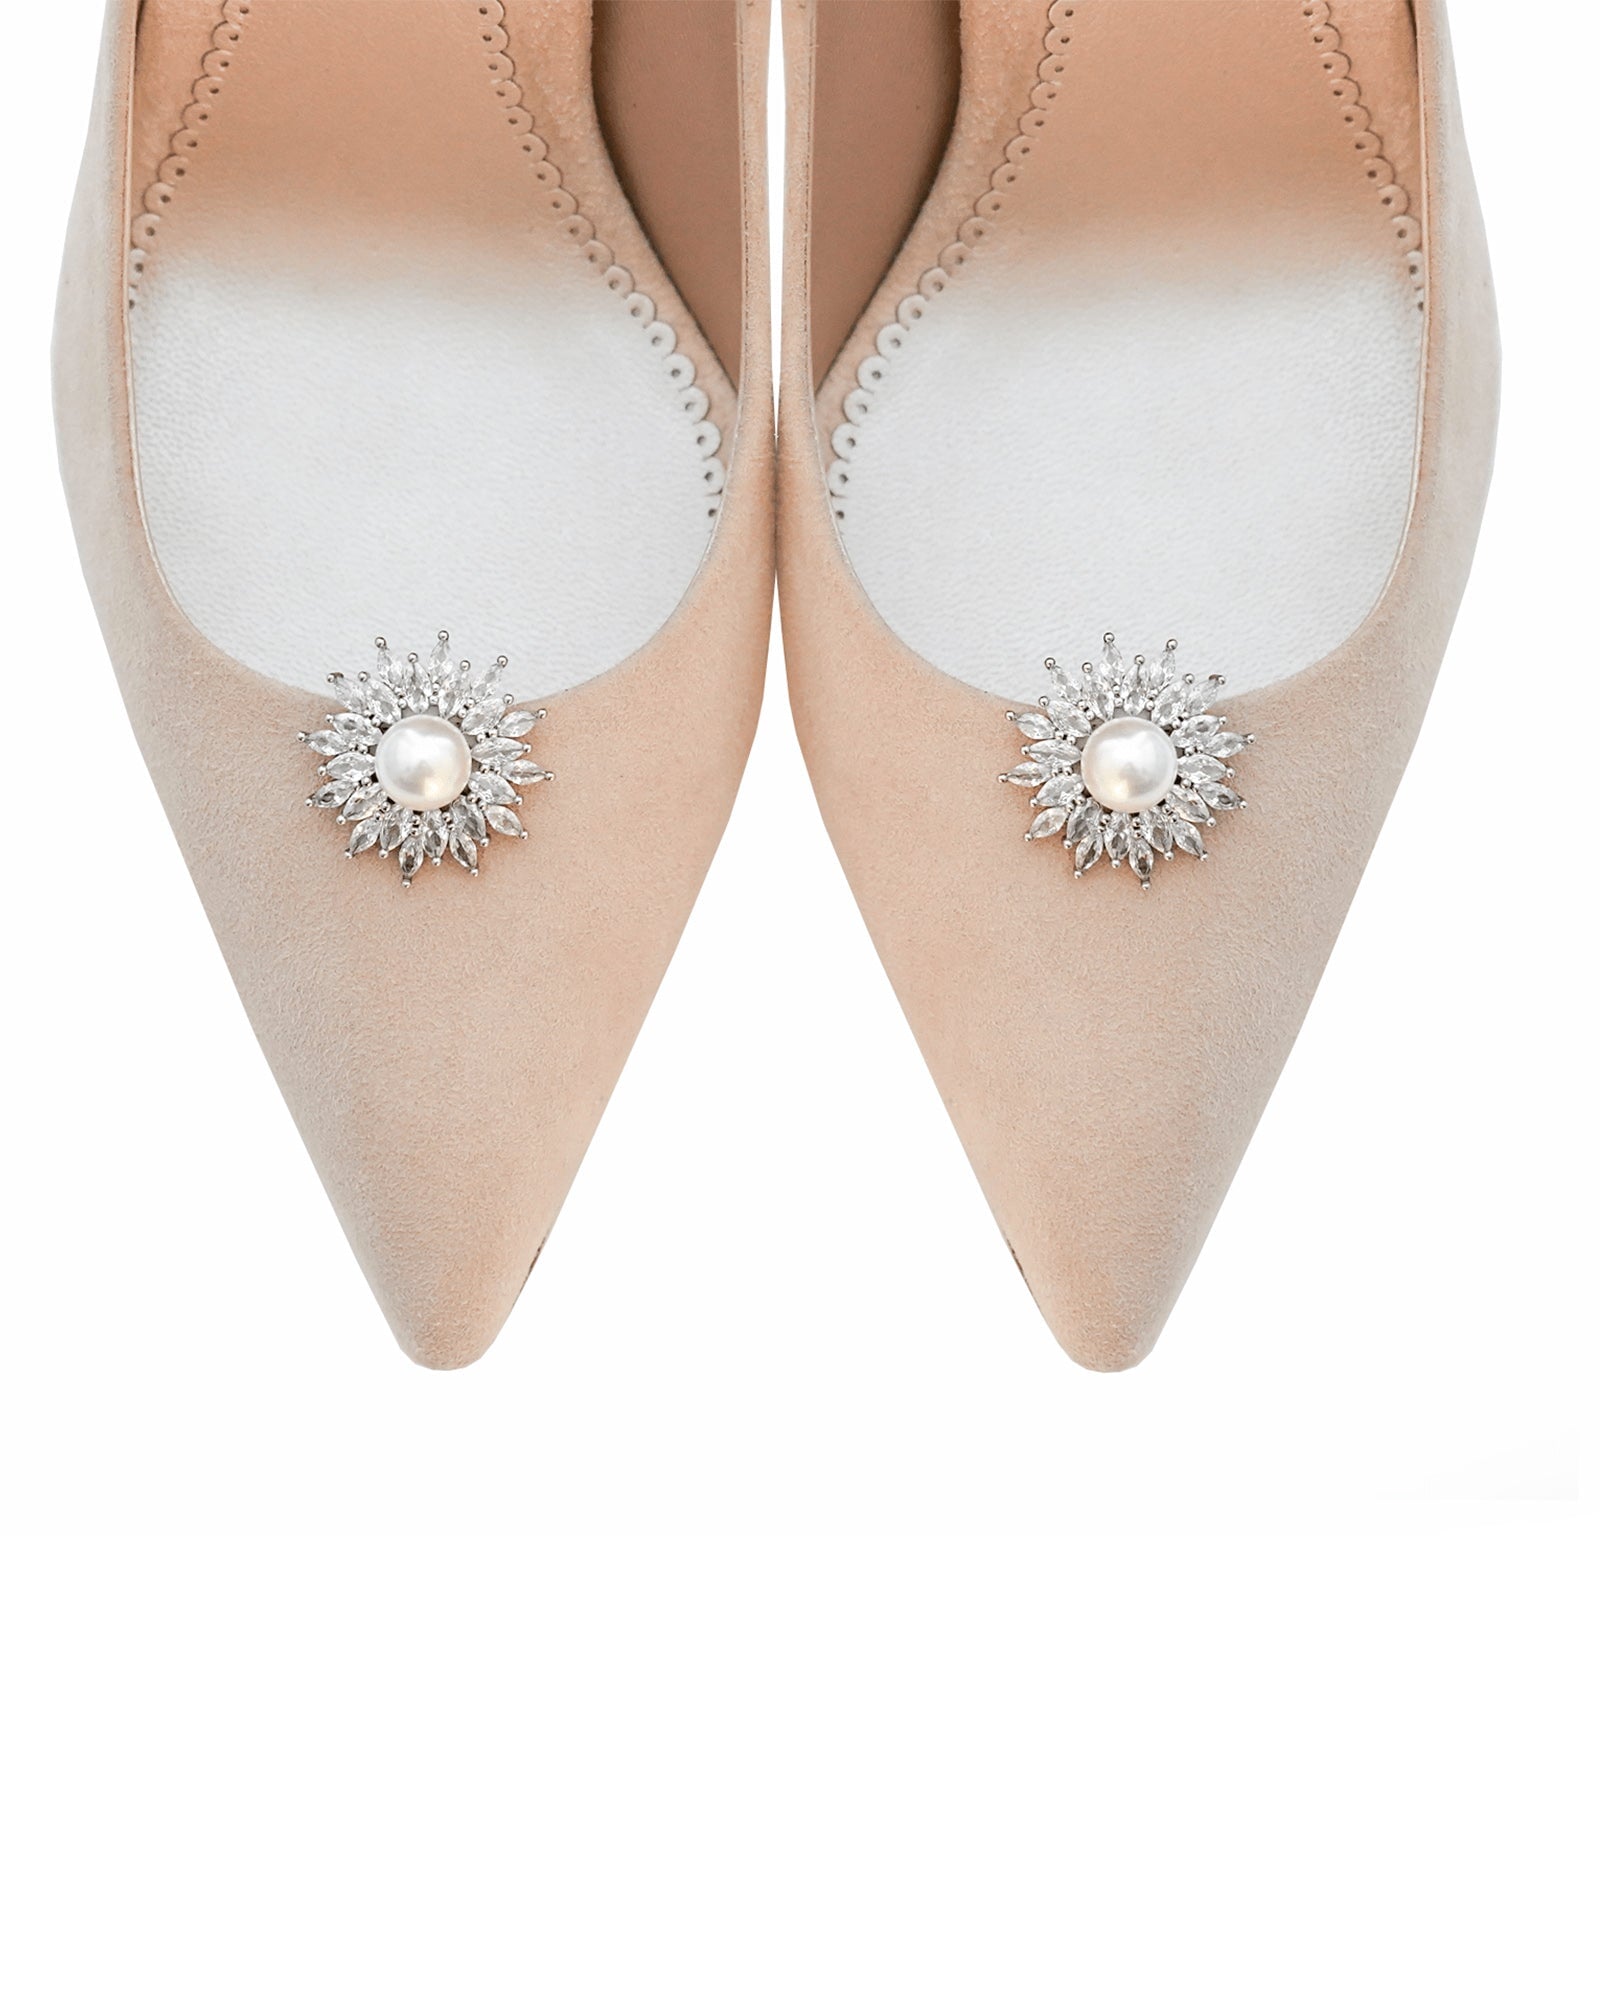 Luna Pearl Shoe Clips Shoe Clip Crystal and Pearl Shoe Clip  image